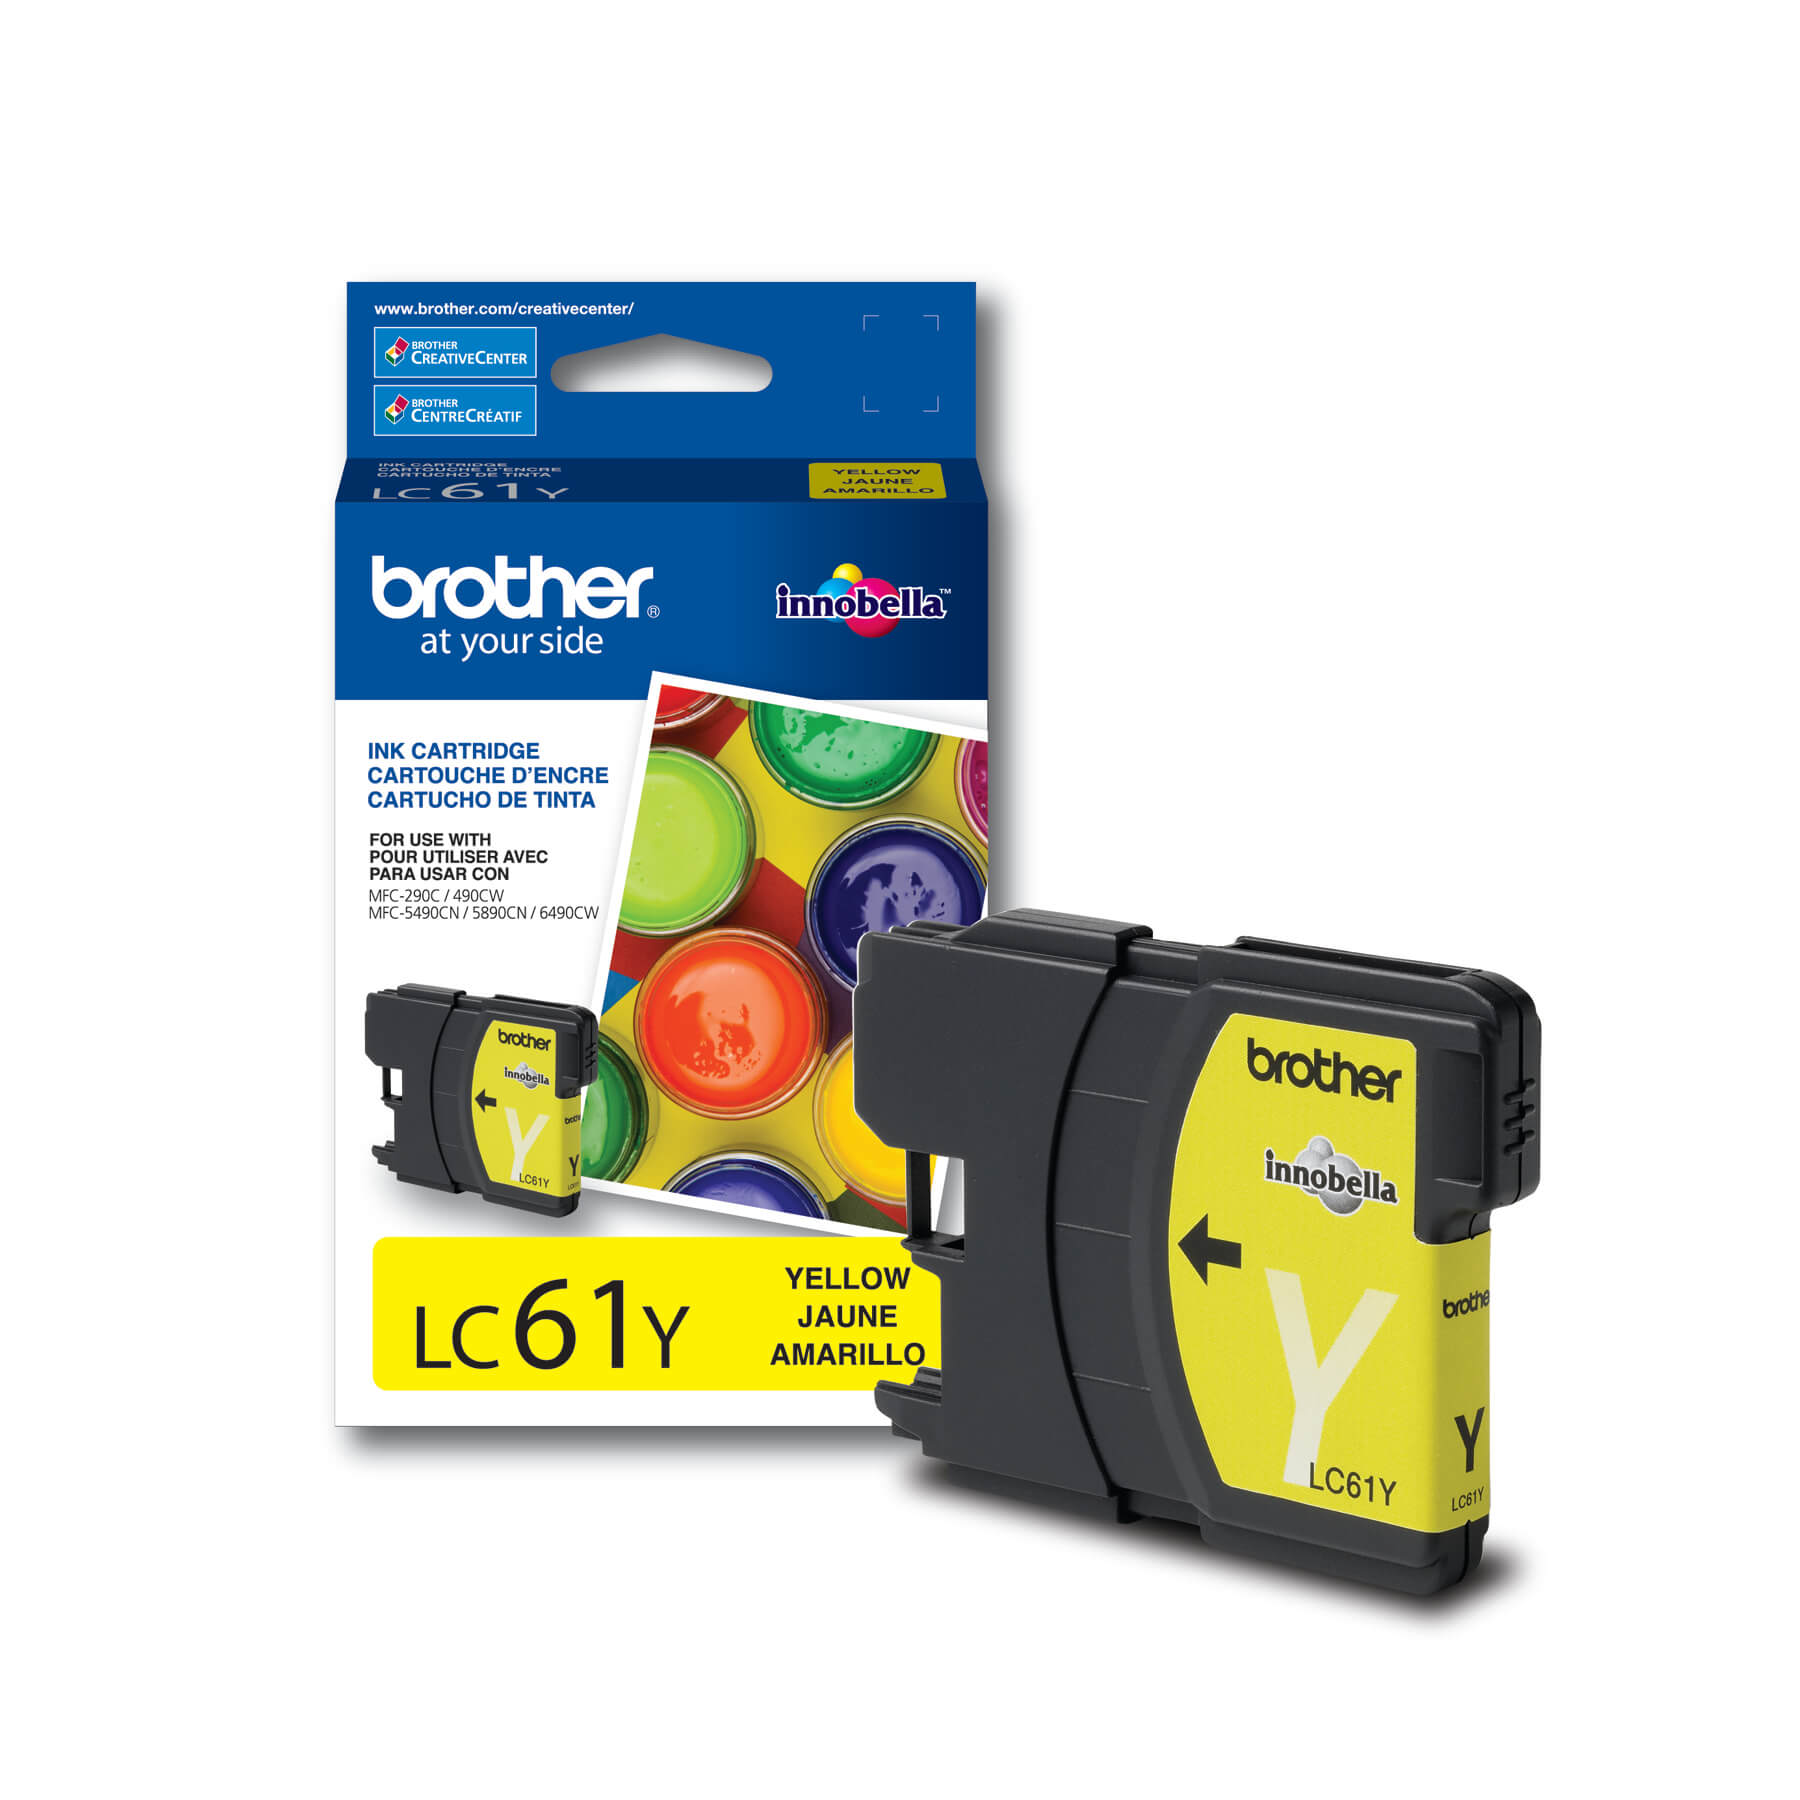 Brother MFC-6490CW review: Brother MFC-6490CW - CNET